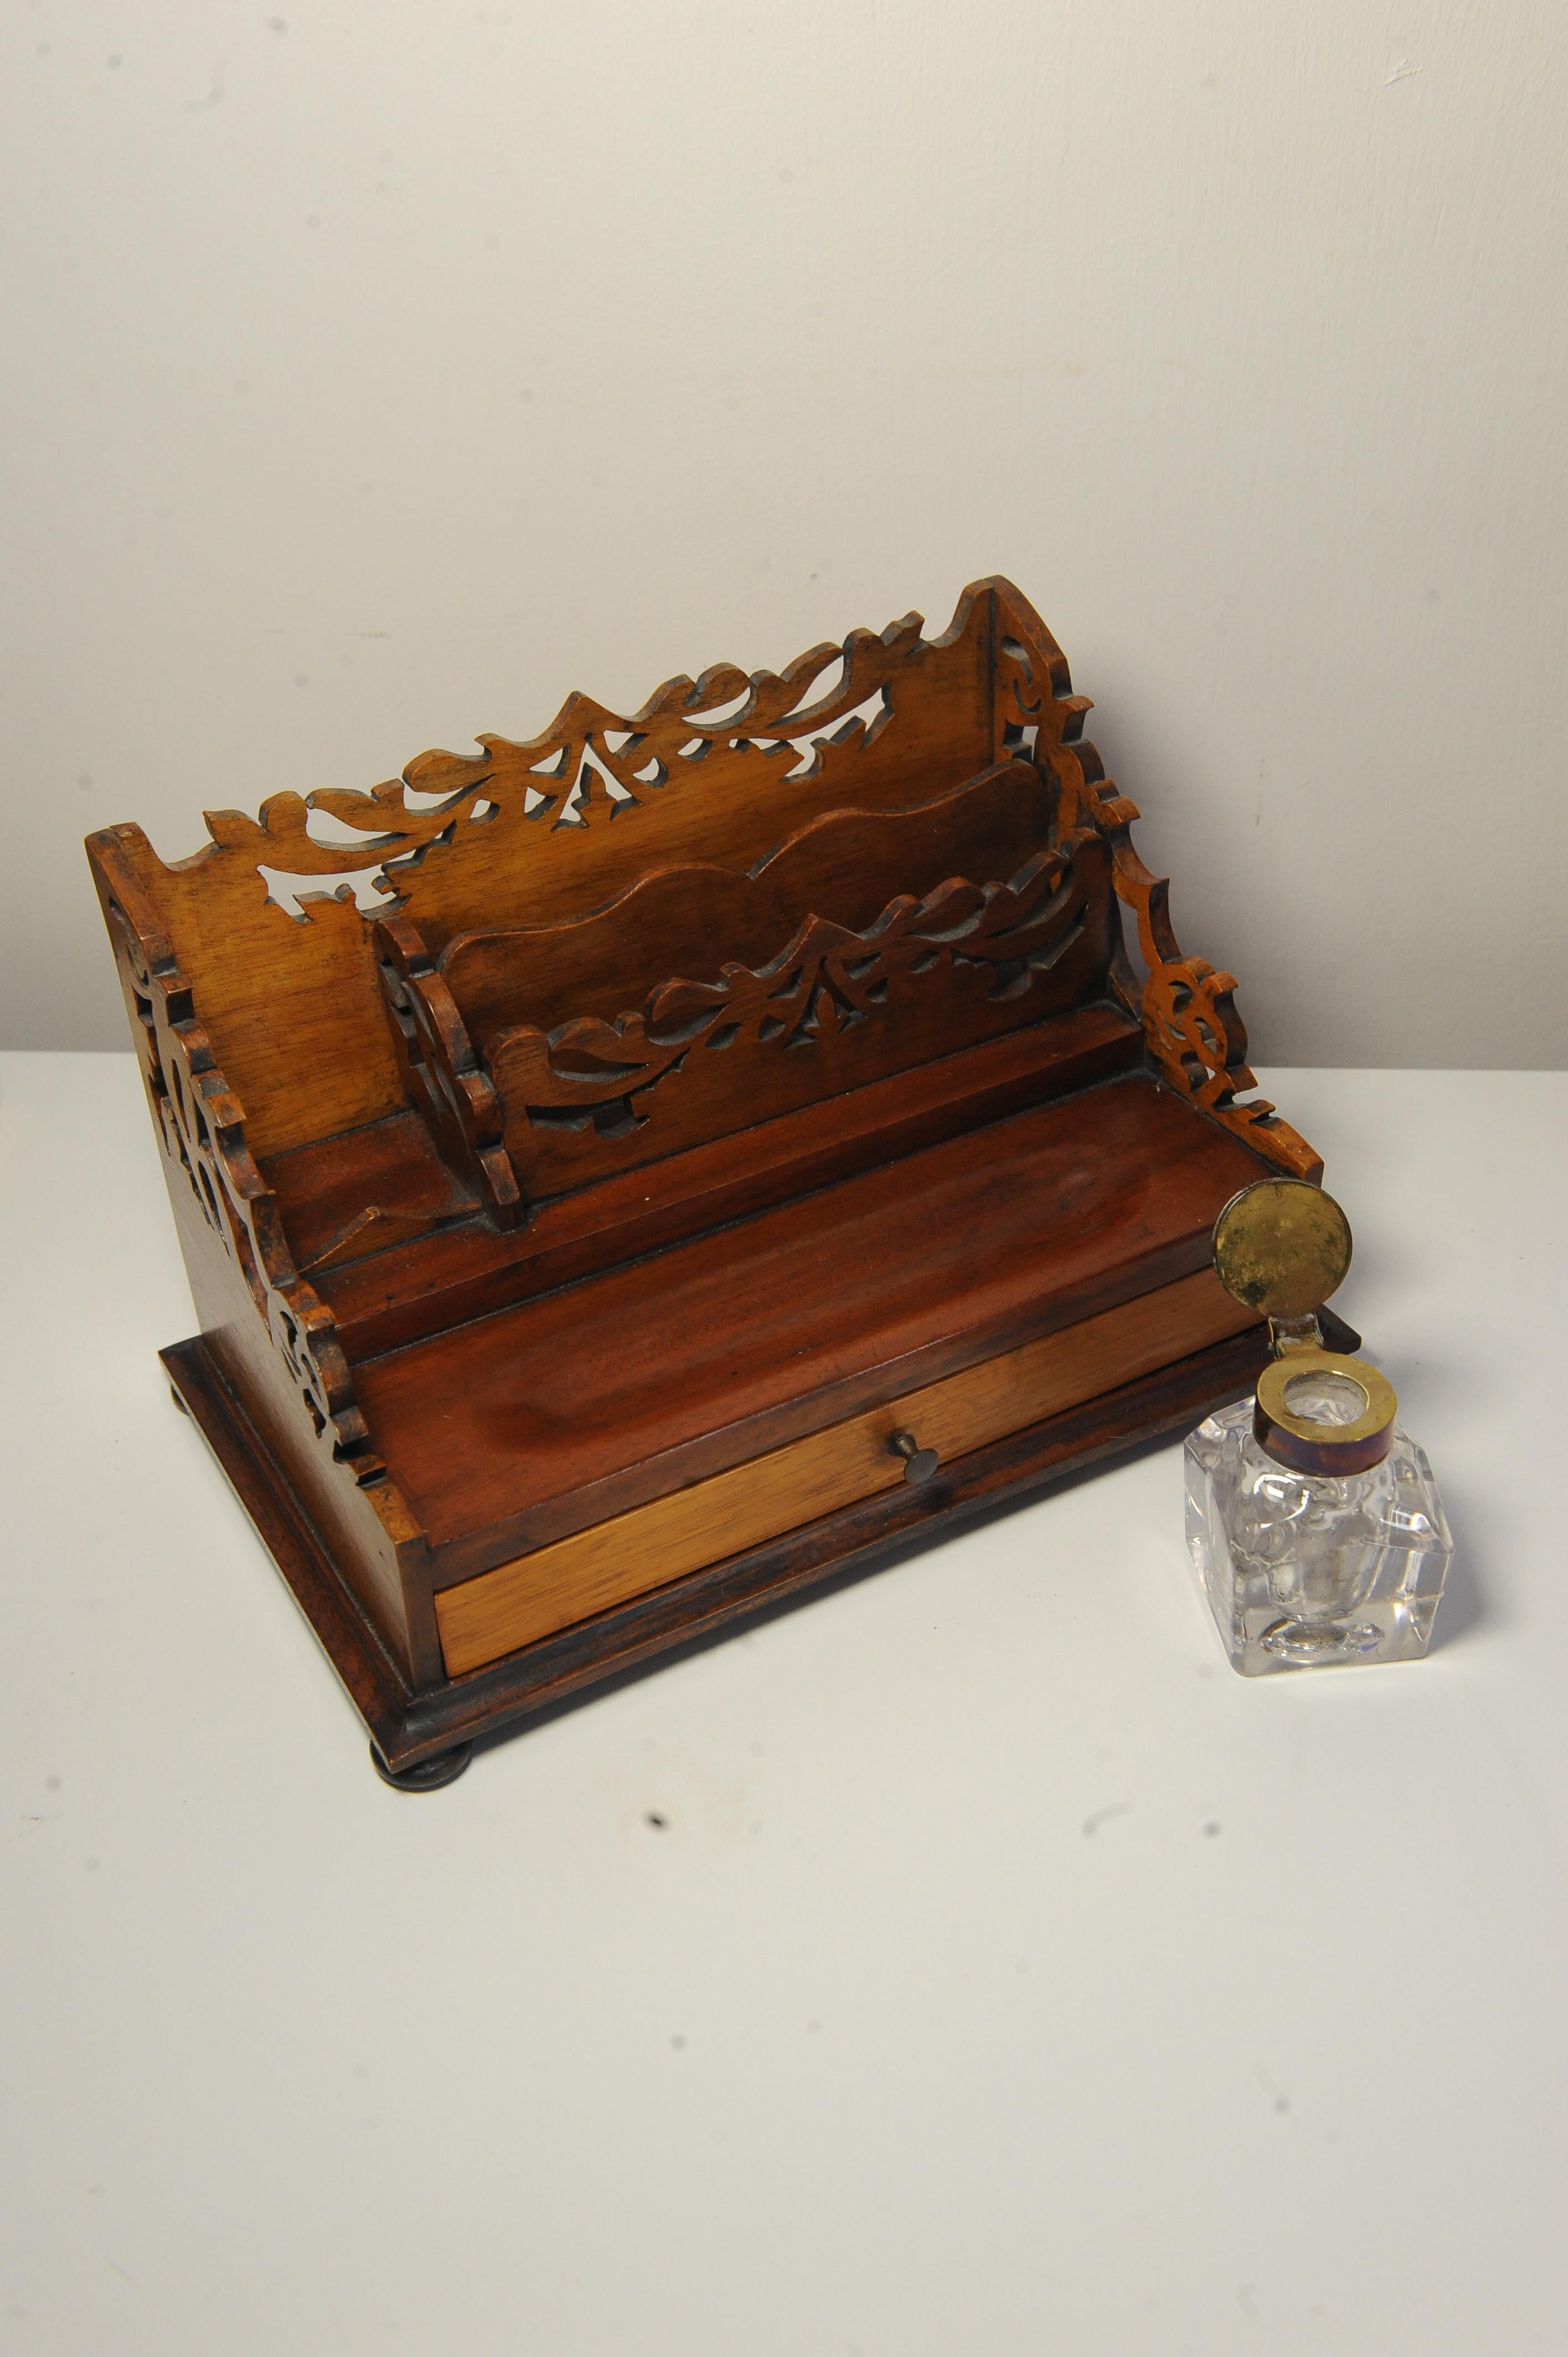  Victorian Oak Hand Crafted Letter Rack With Intricately Cut Art Nouveau Motifs  For Sale 7